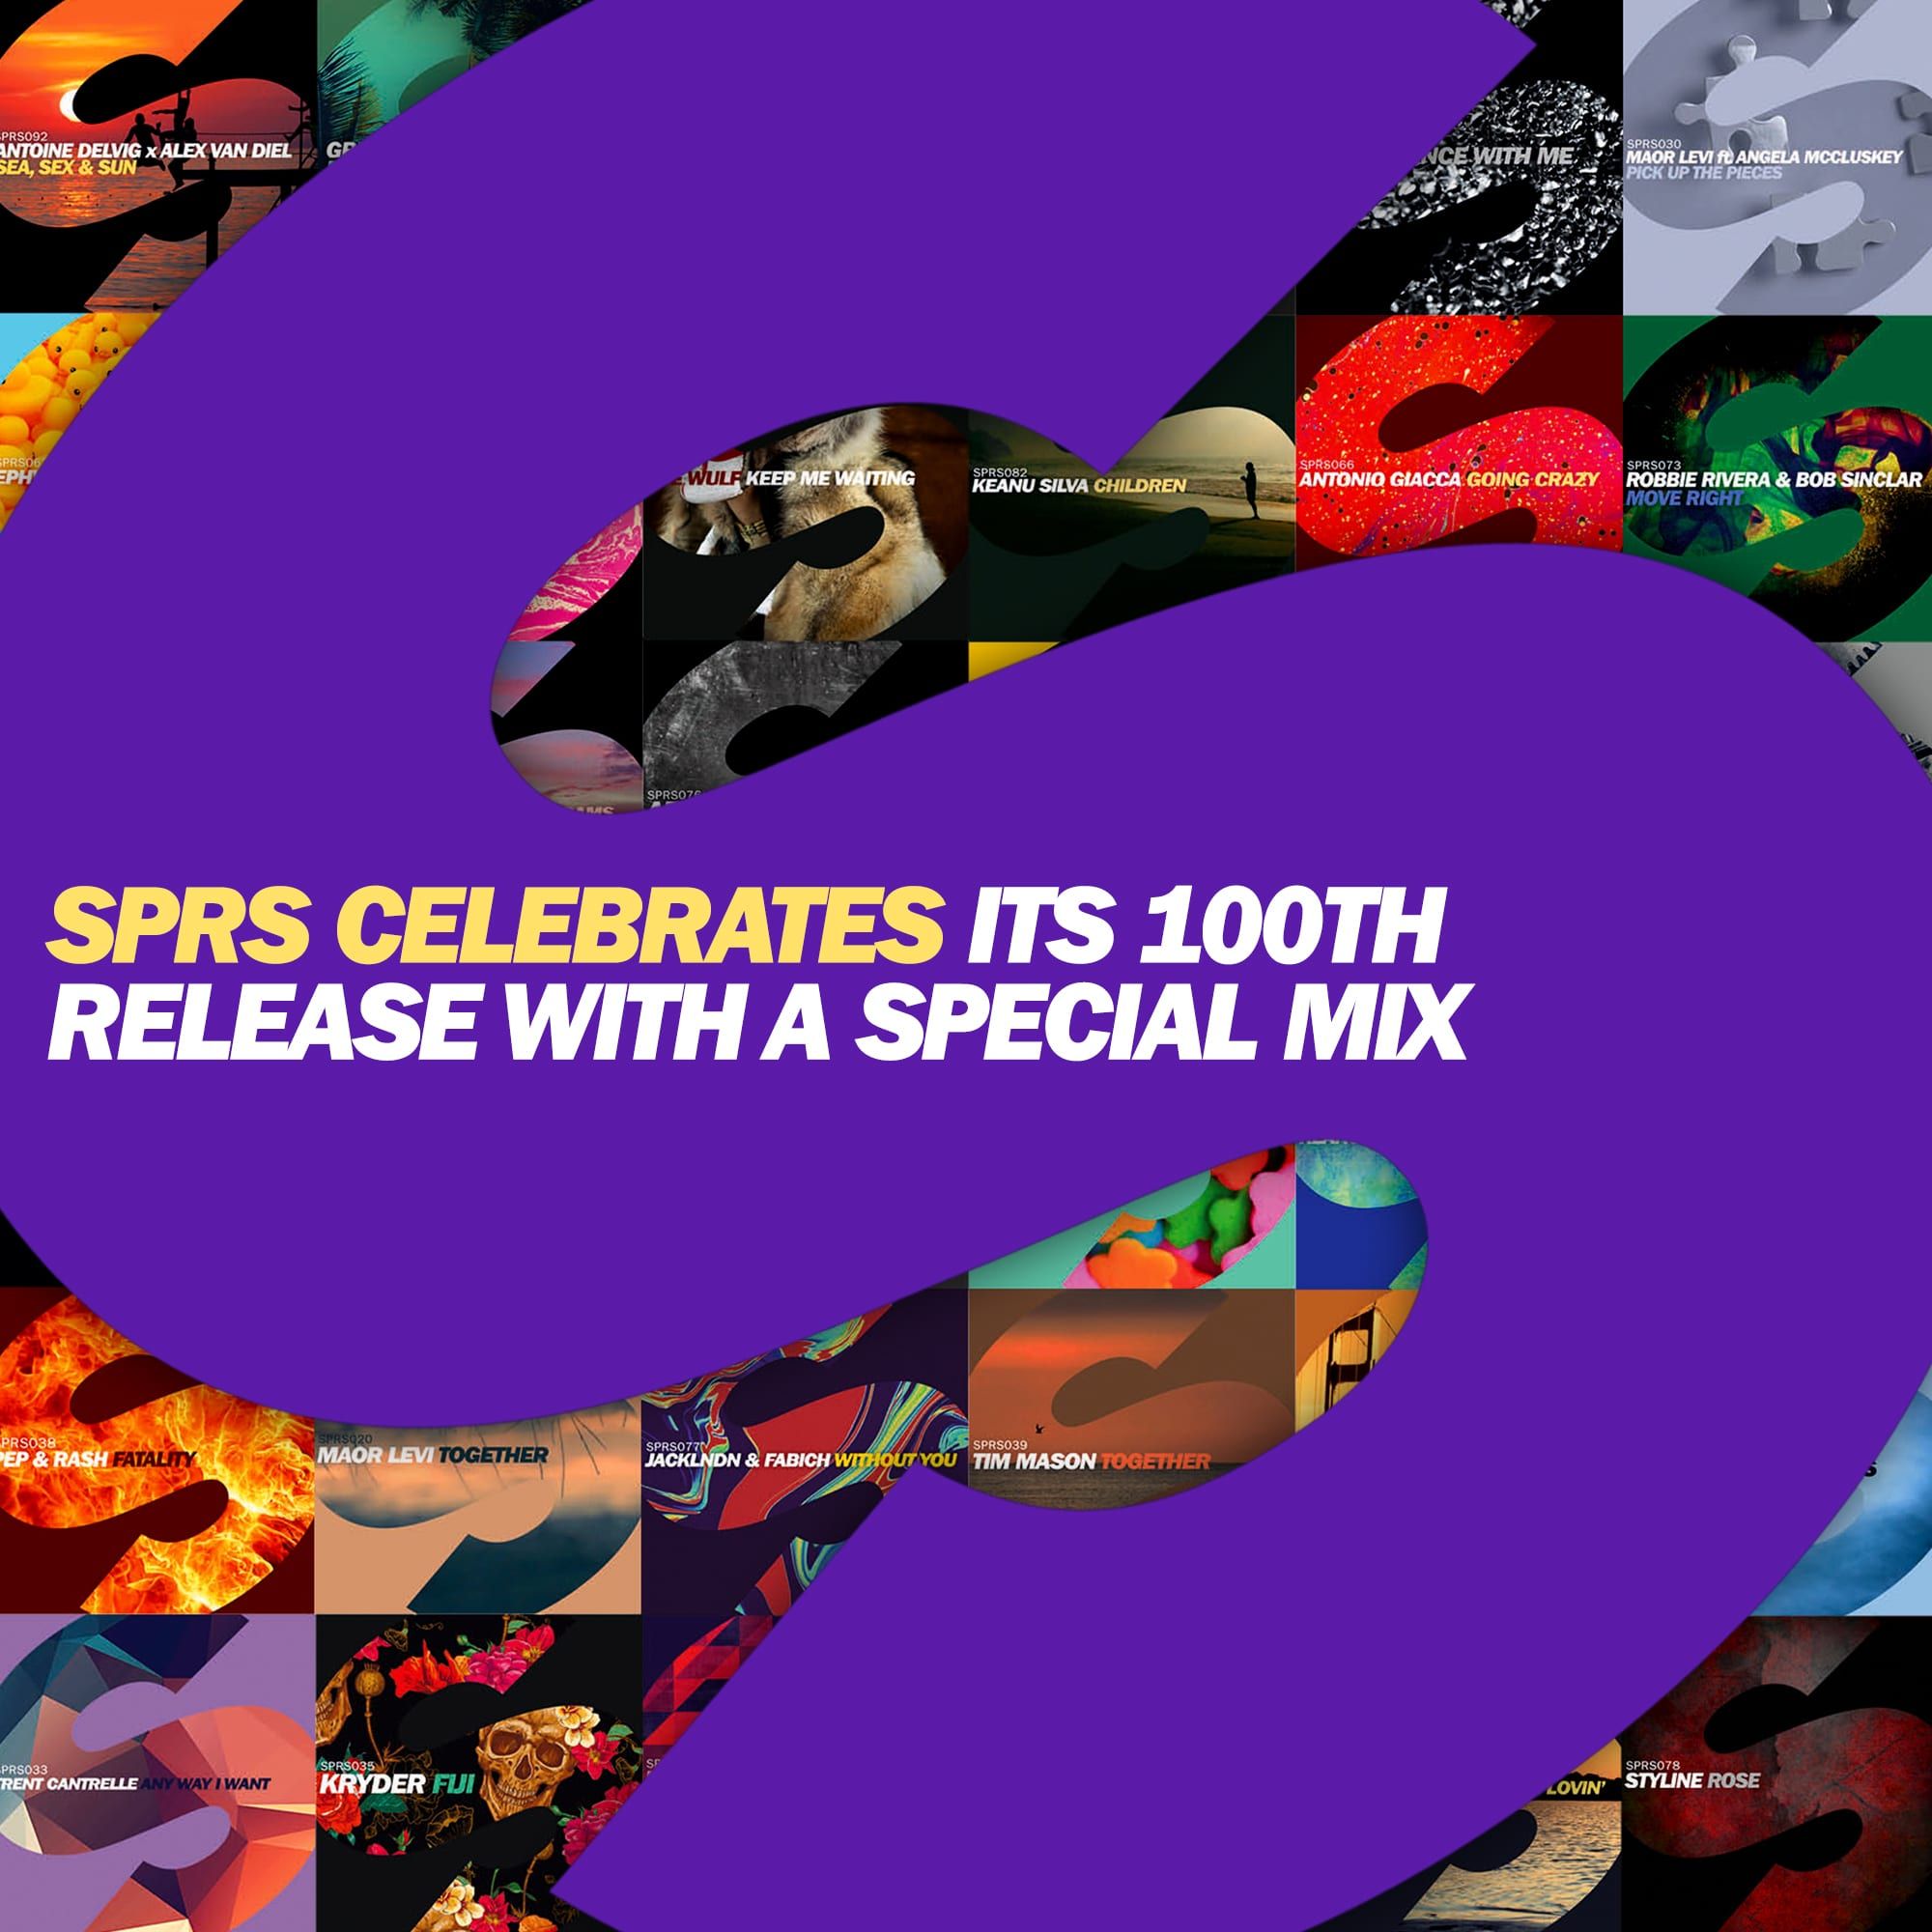 sprs_100th_release_special_mix.jpeg